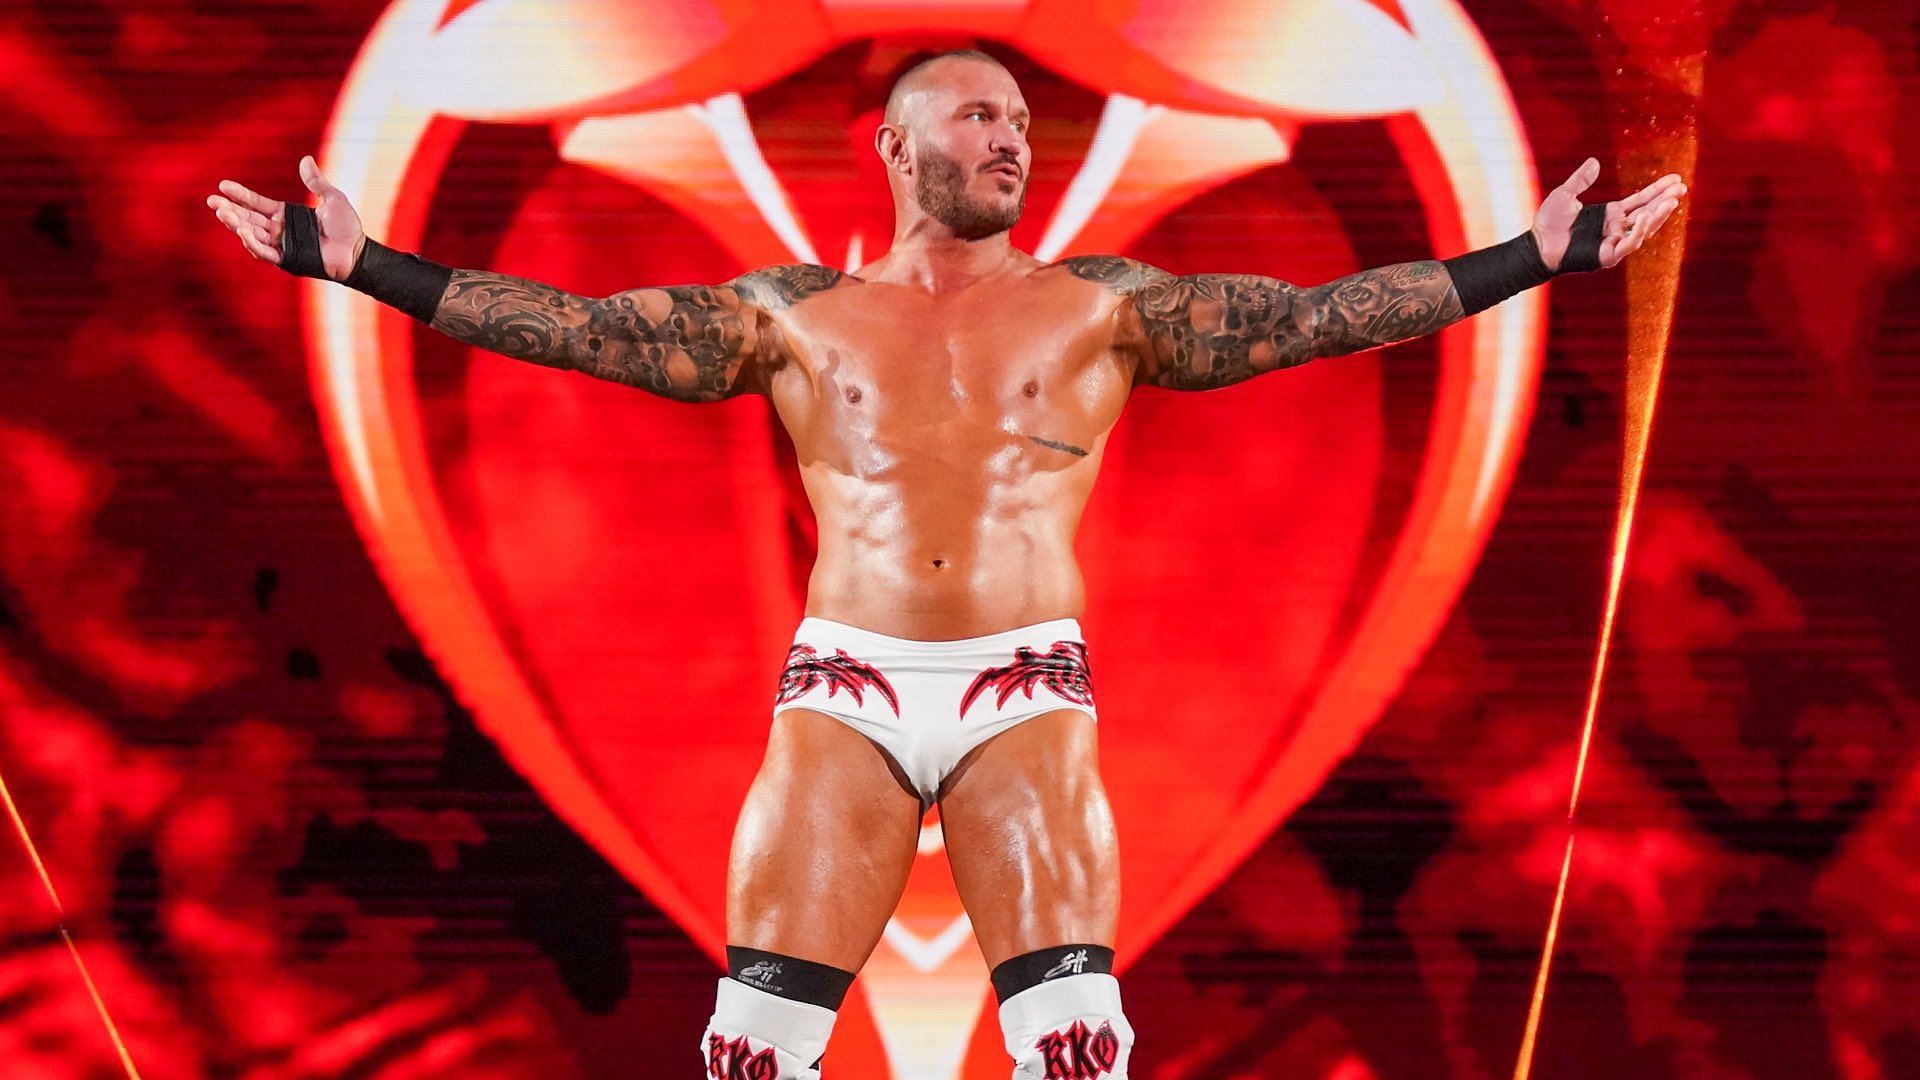 Randy Orton is currently competing in the tag team division on RAW